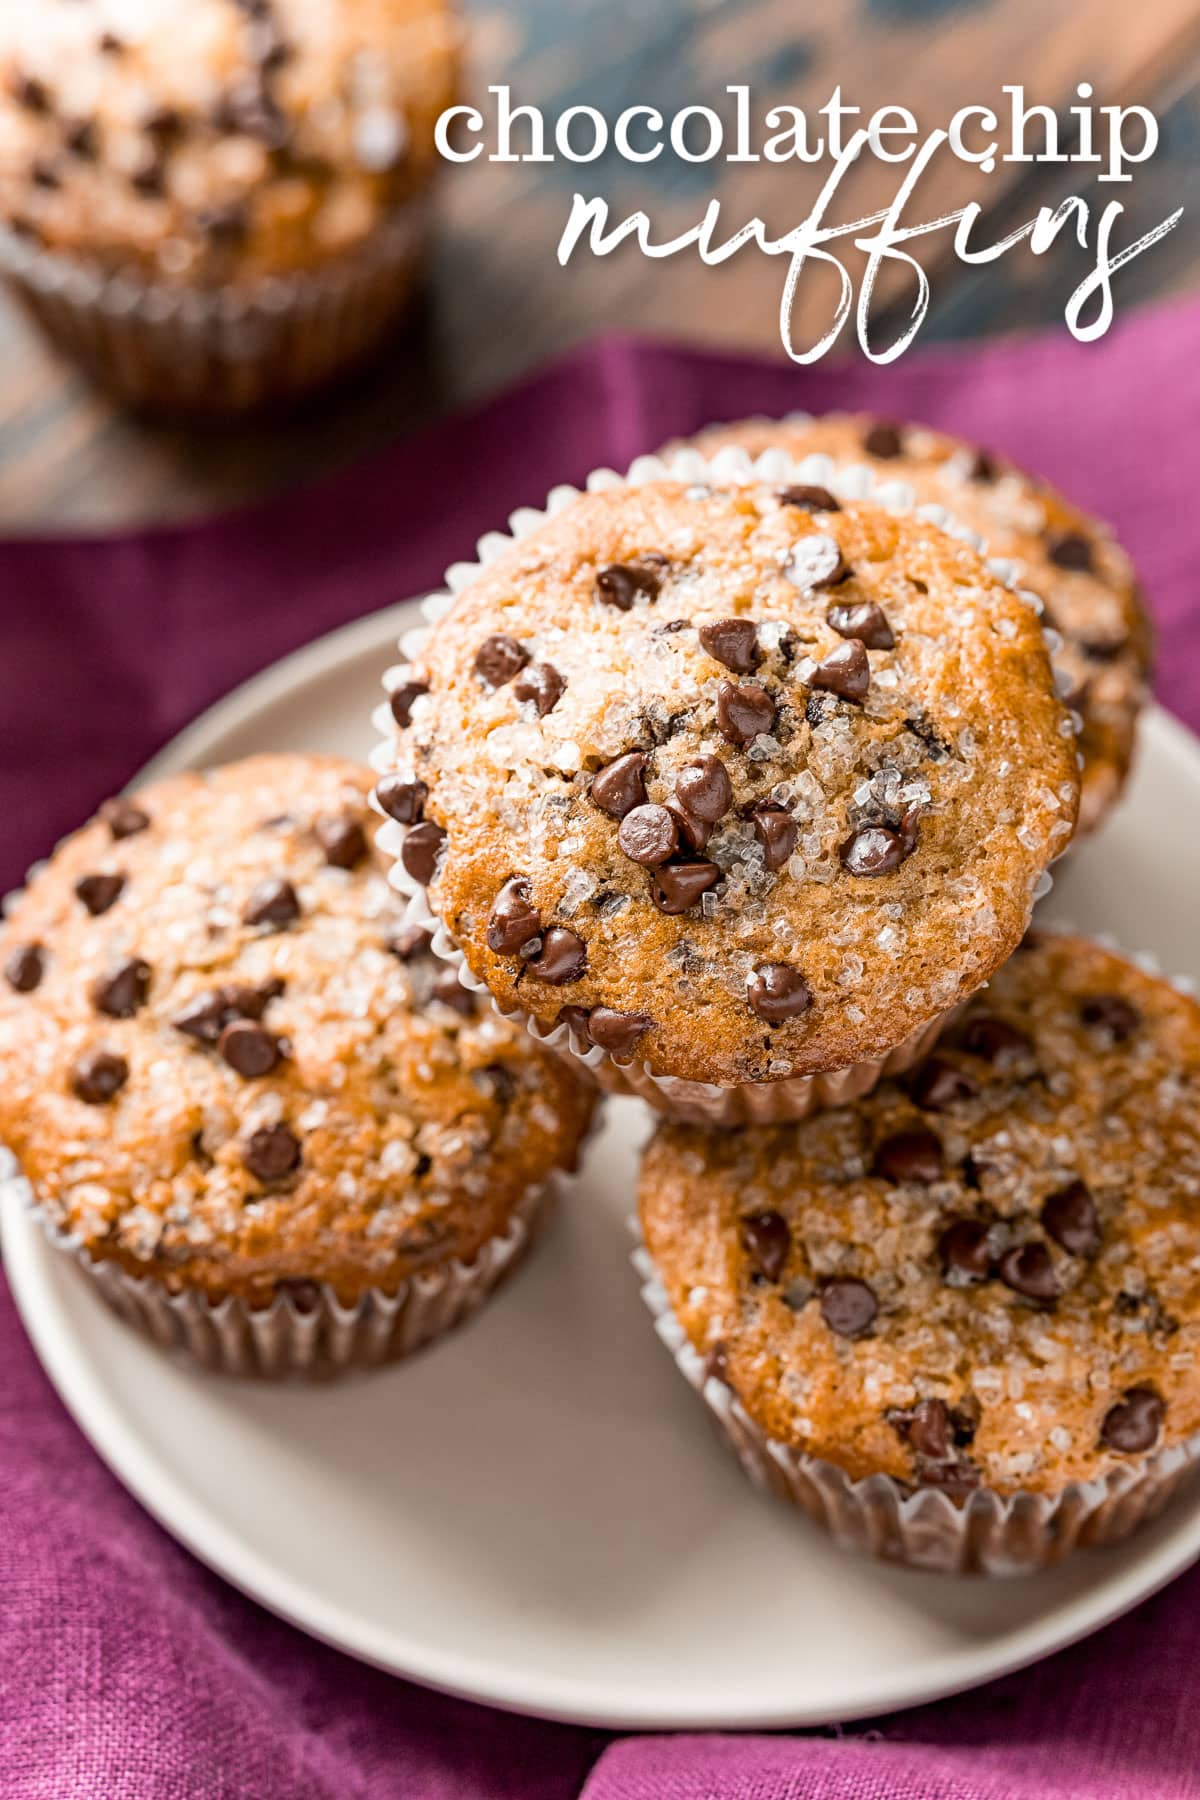 four chocolate chip muffins on a white plate with a burgundy napkin beneath the plate and title overlay at top of image